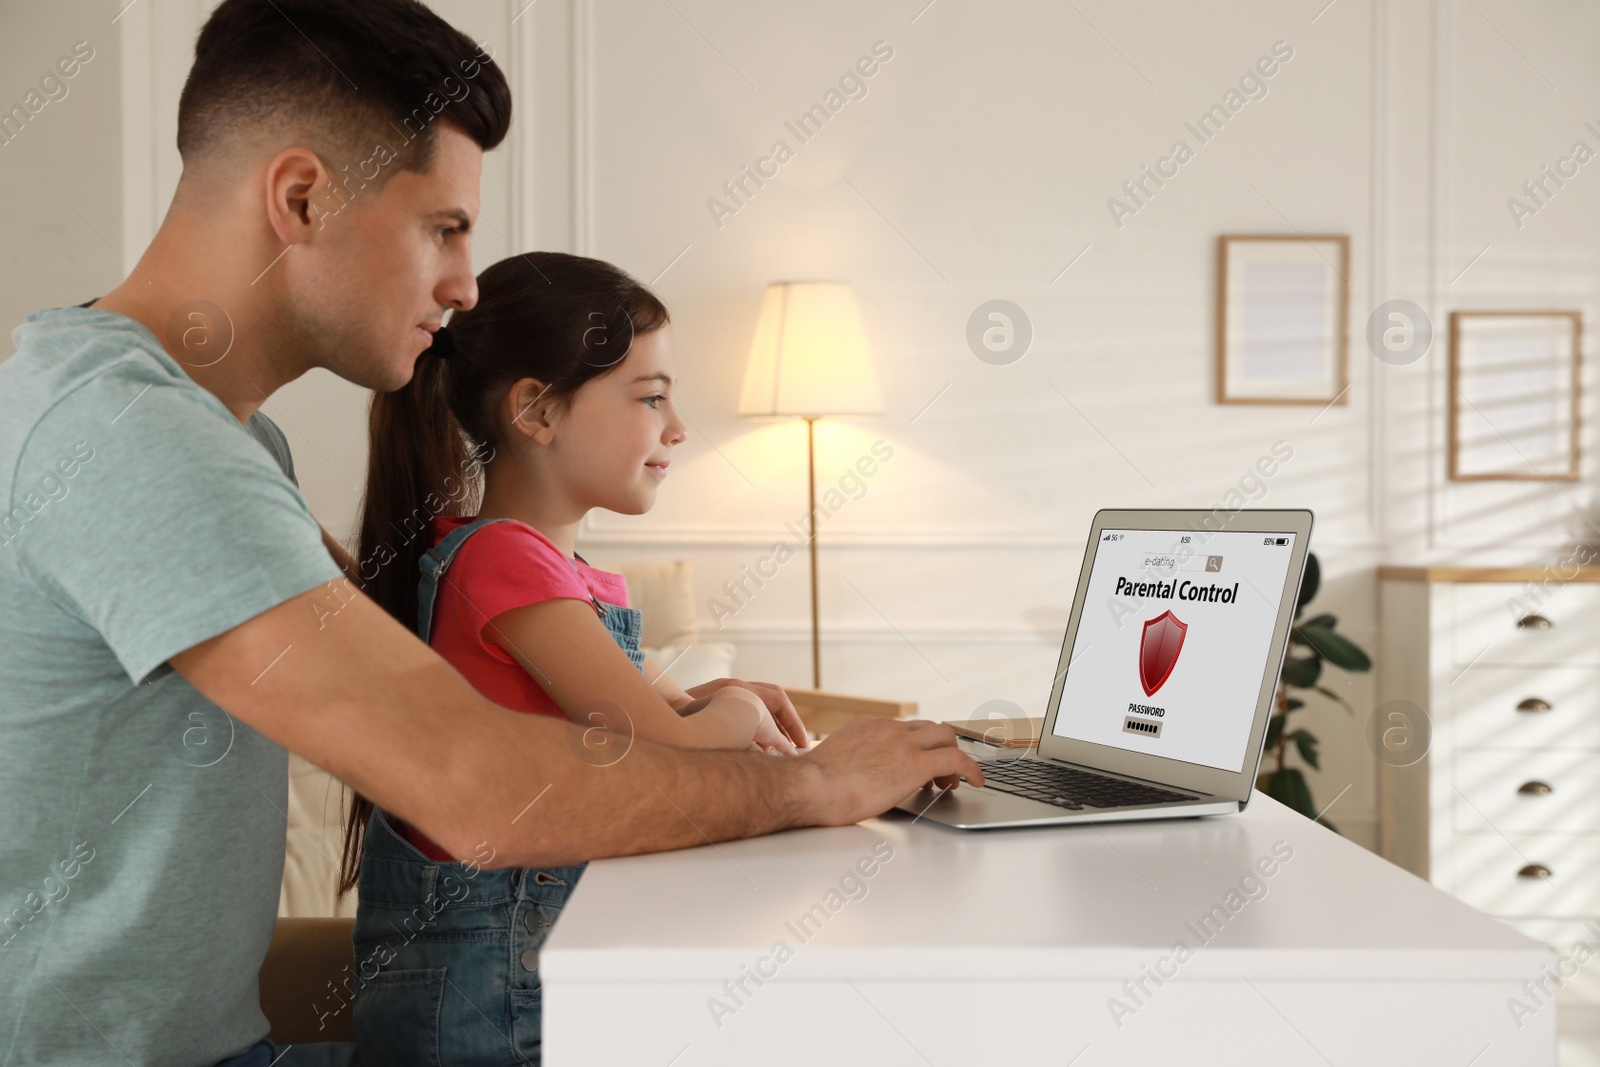 Photo of Father installing parental control app on laptop to ensure his child's safety at home